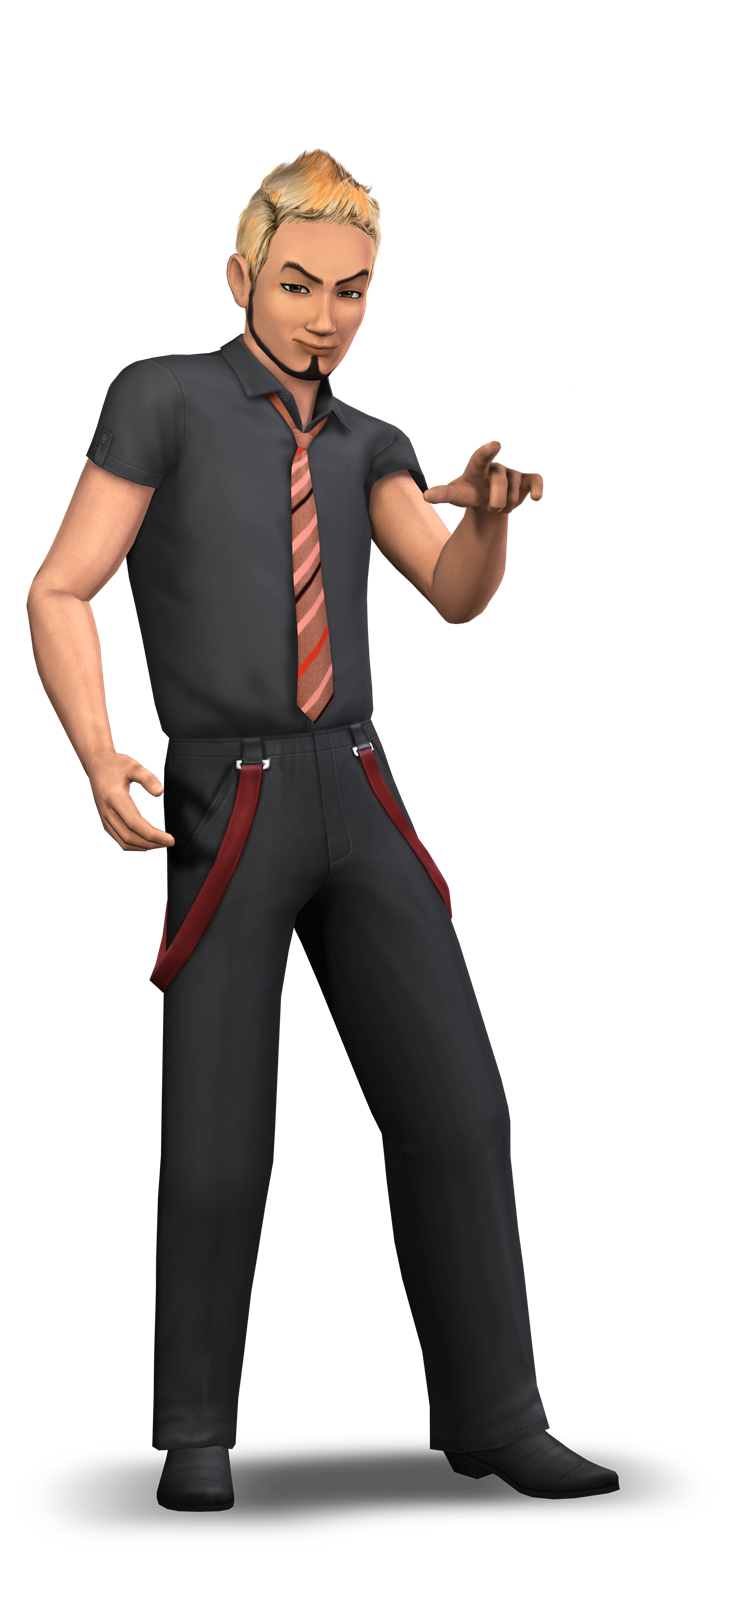 Image - TS3C Render 5.png | The Sims Wiki | FANDOM powered by Wikia